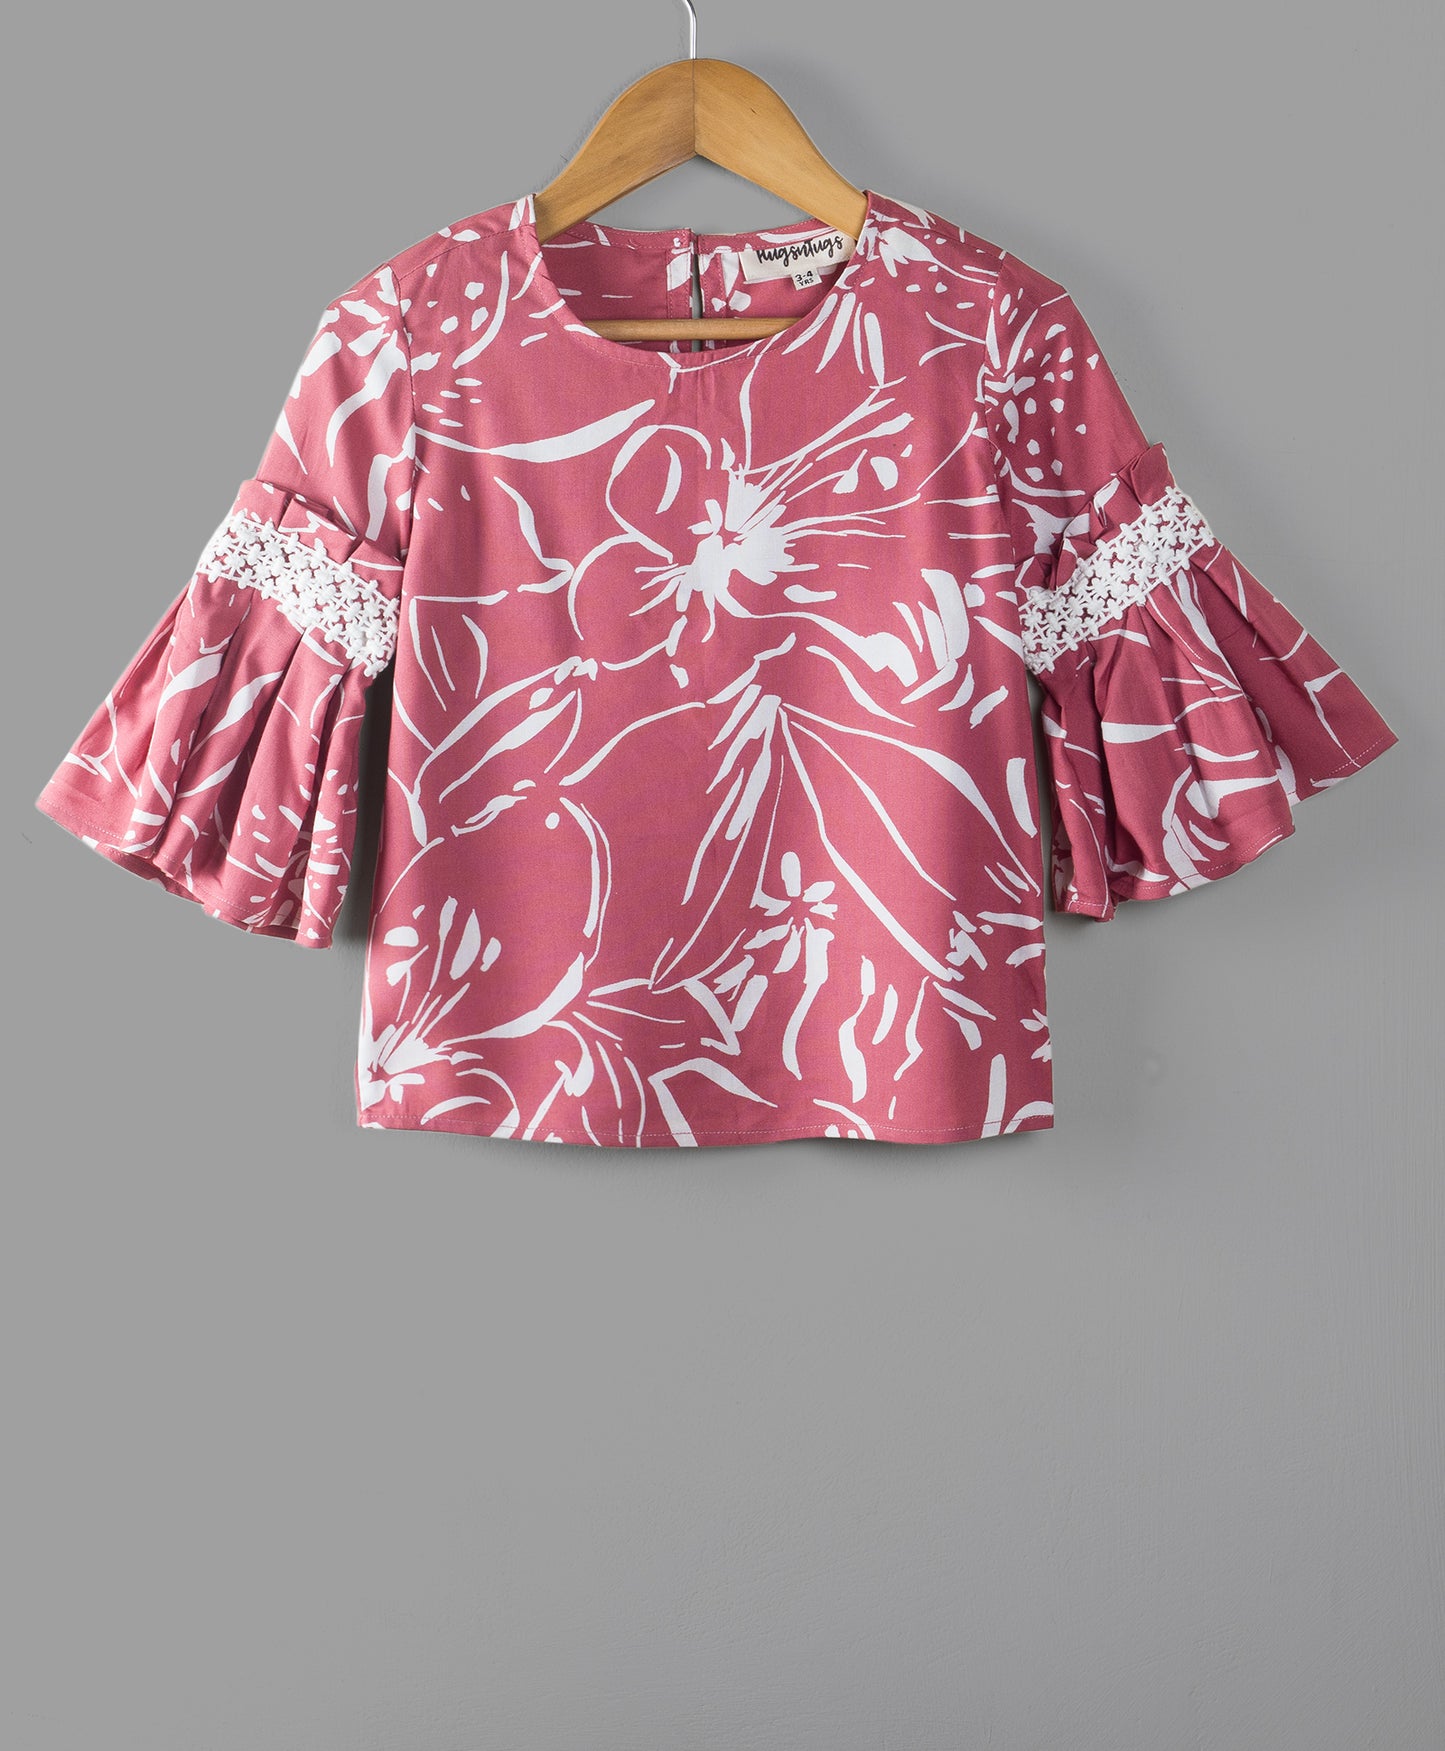 ABSTRACT PRINT TOP WITH LACE DETAILING ON THE SLEEVES